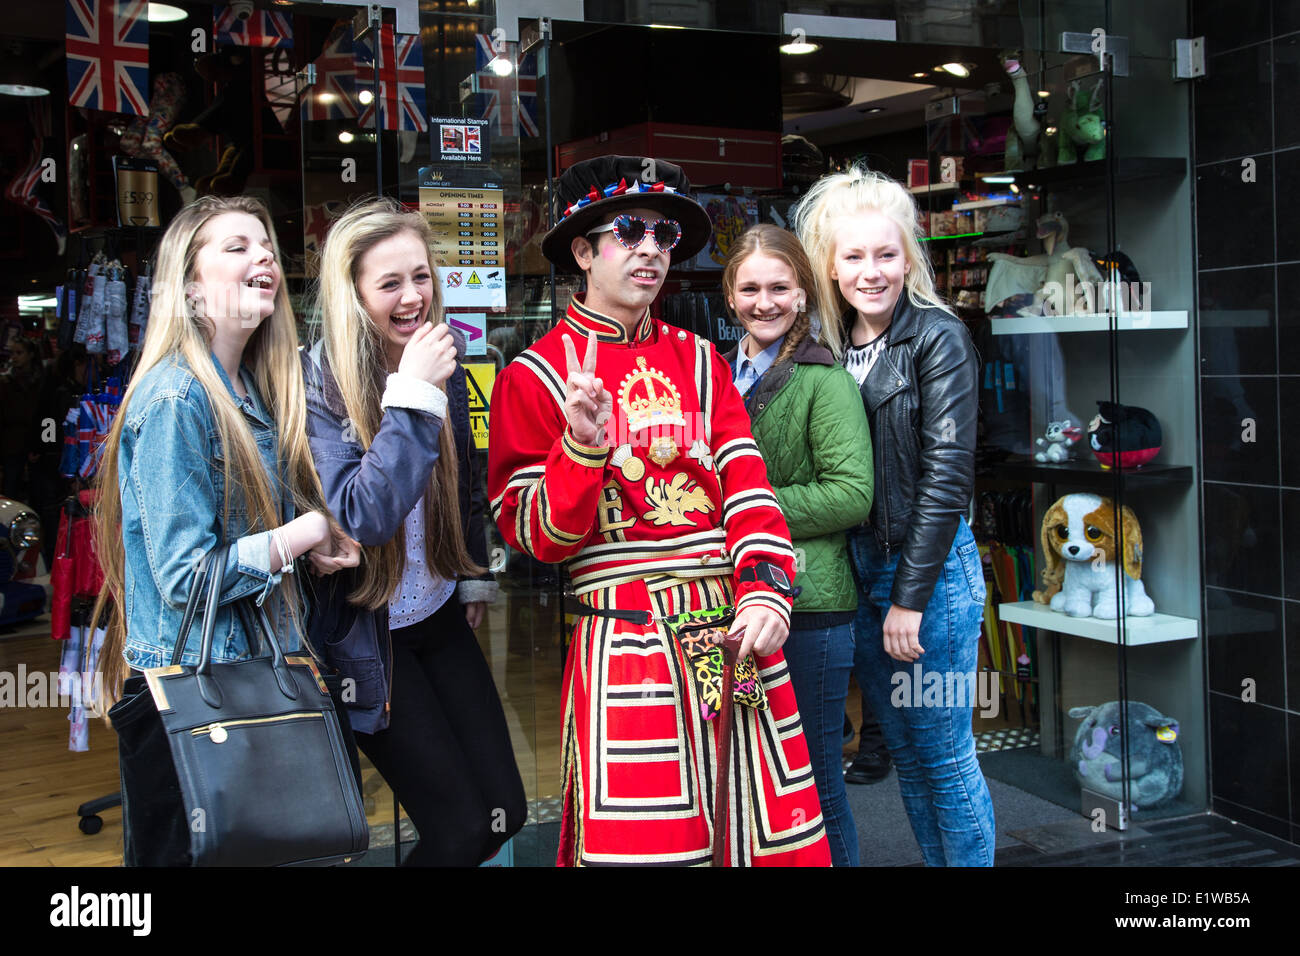 Shop Assistant dressed as a Beafeater poses for a photo with tourists, Piccadilly, London Stock Photo